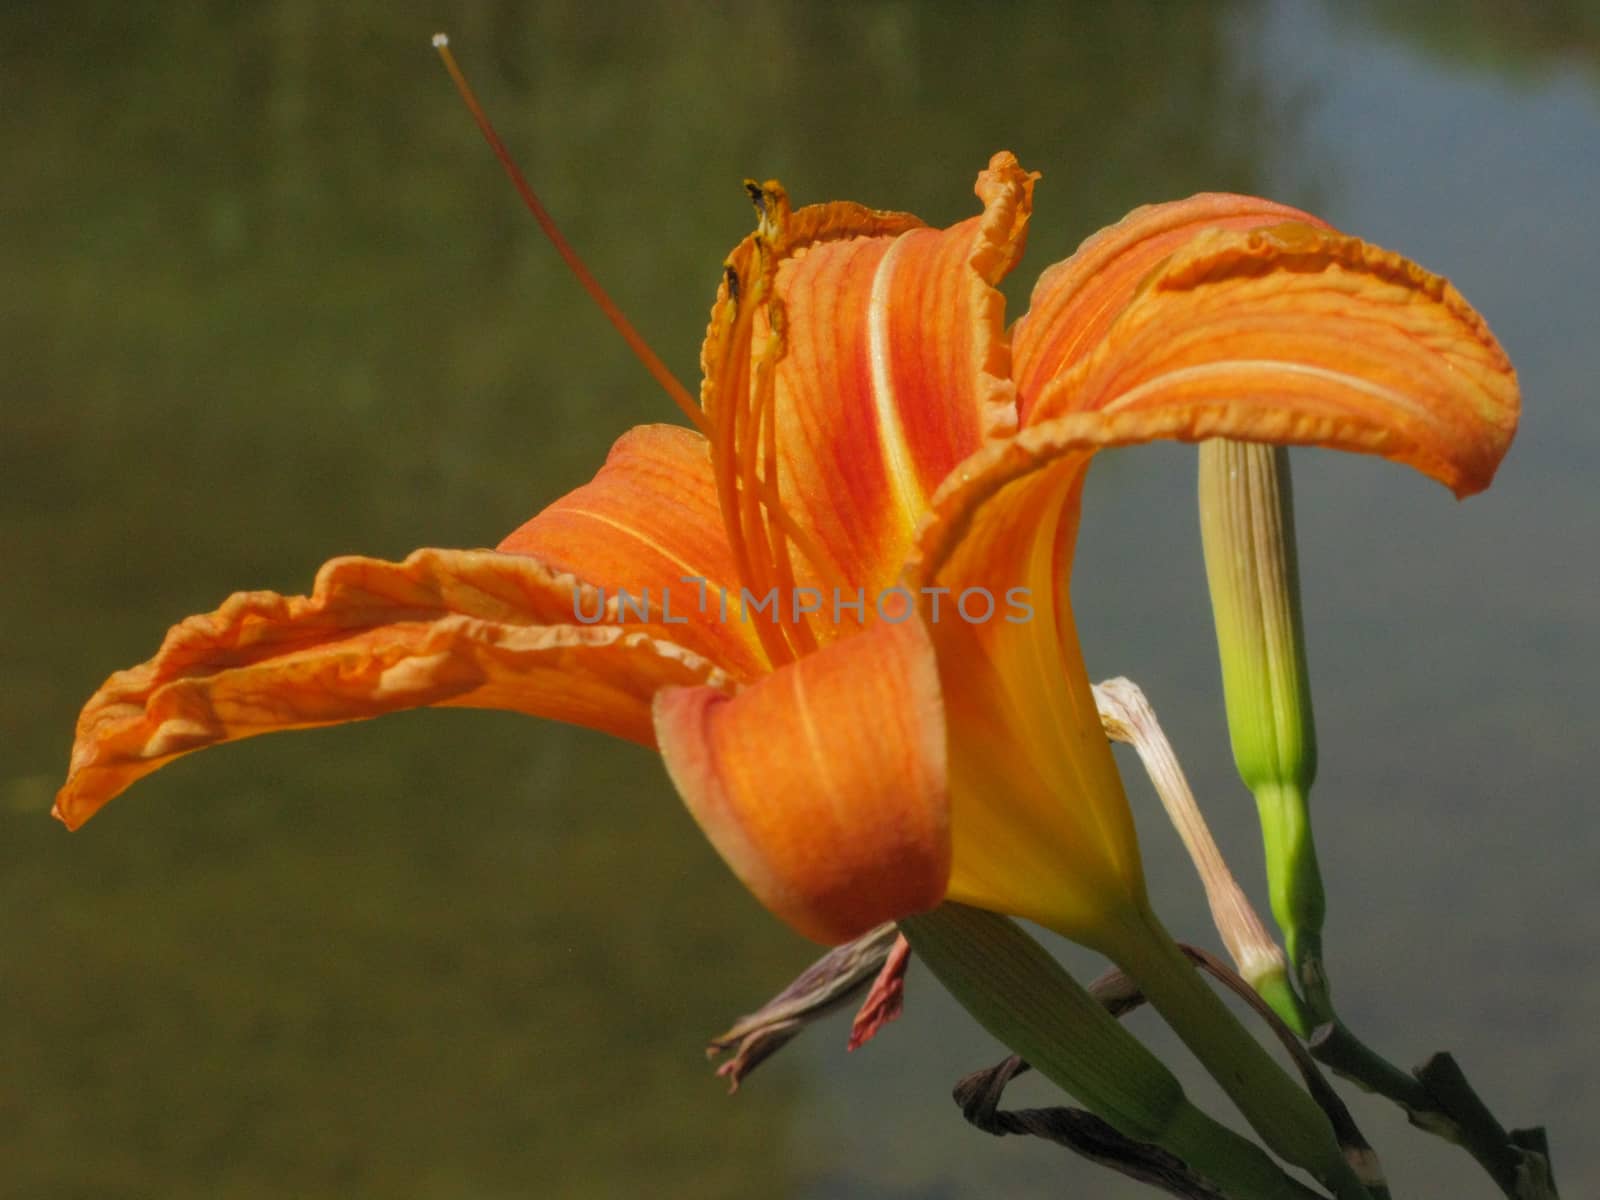 Flower of an orange lily with delicate petals. She pulls her antennae toward the sun by Adamchuk